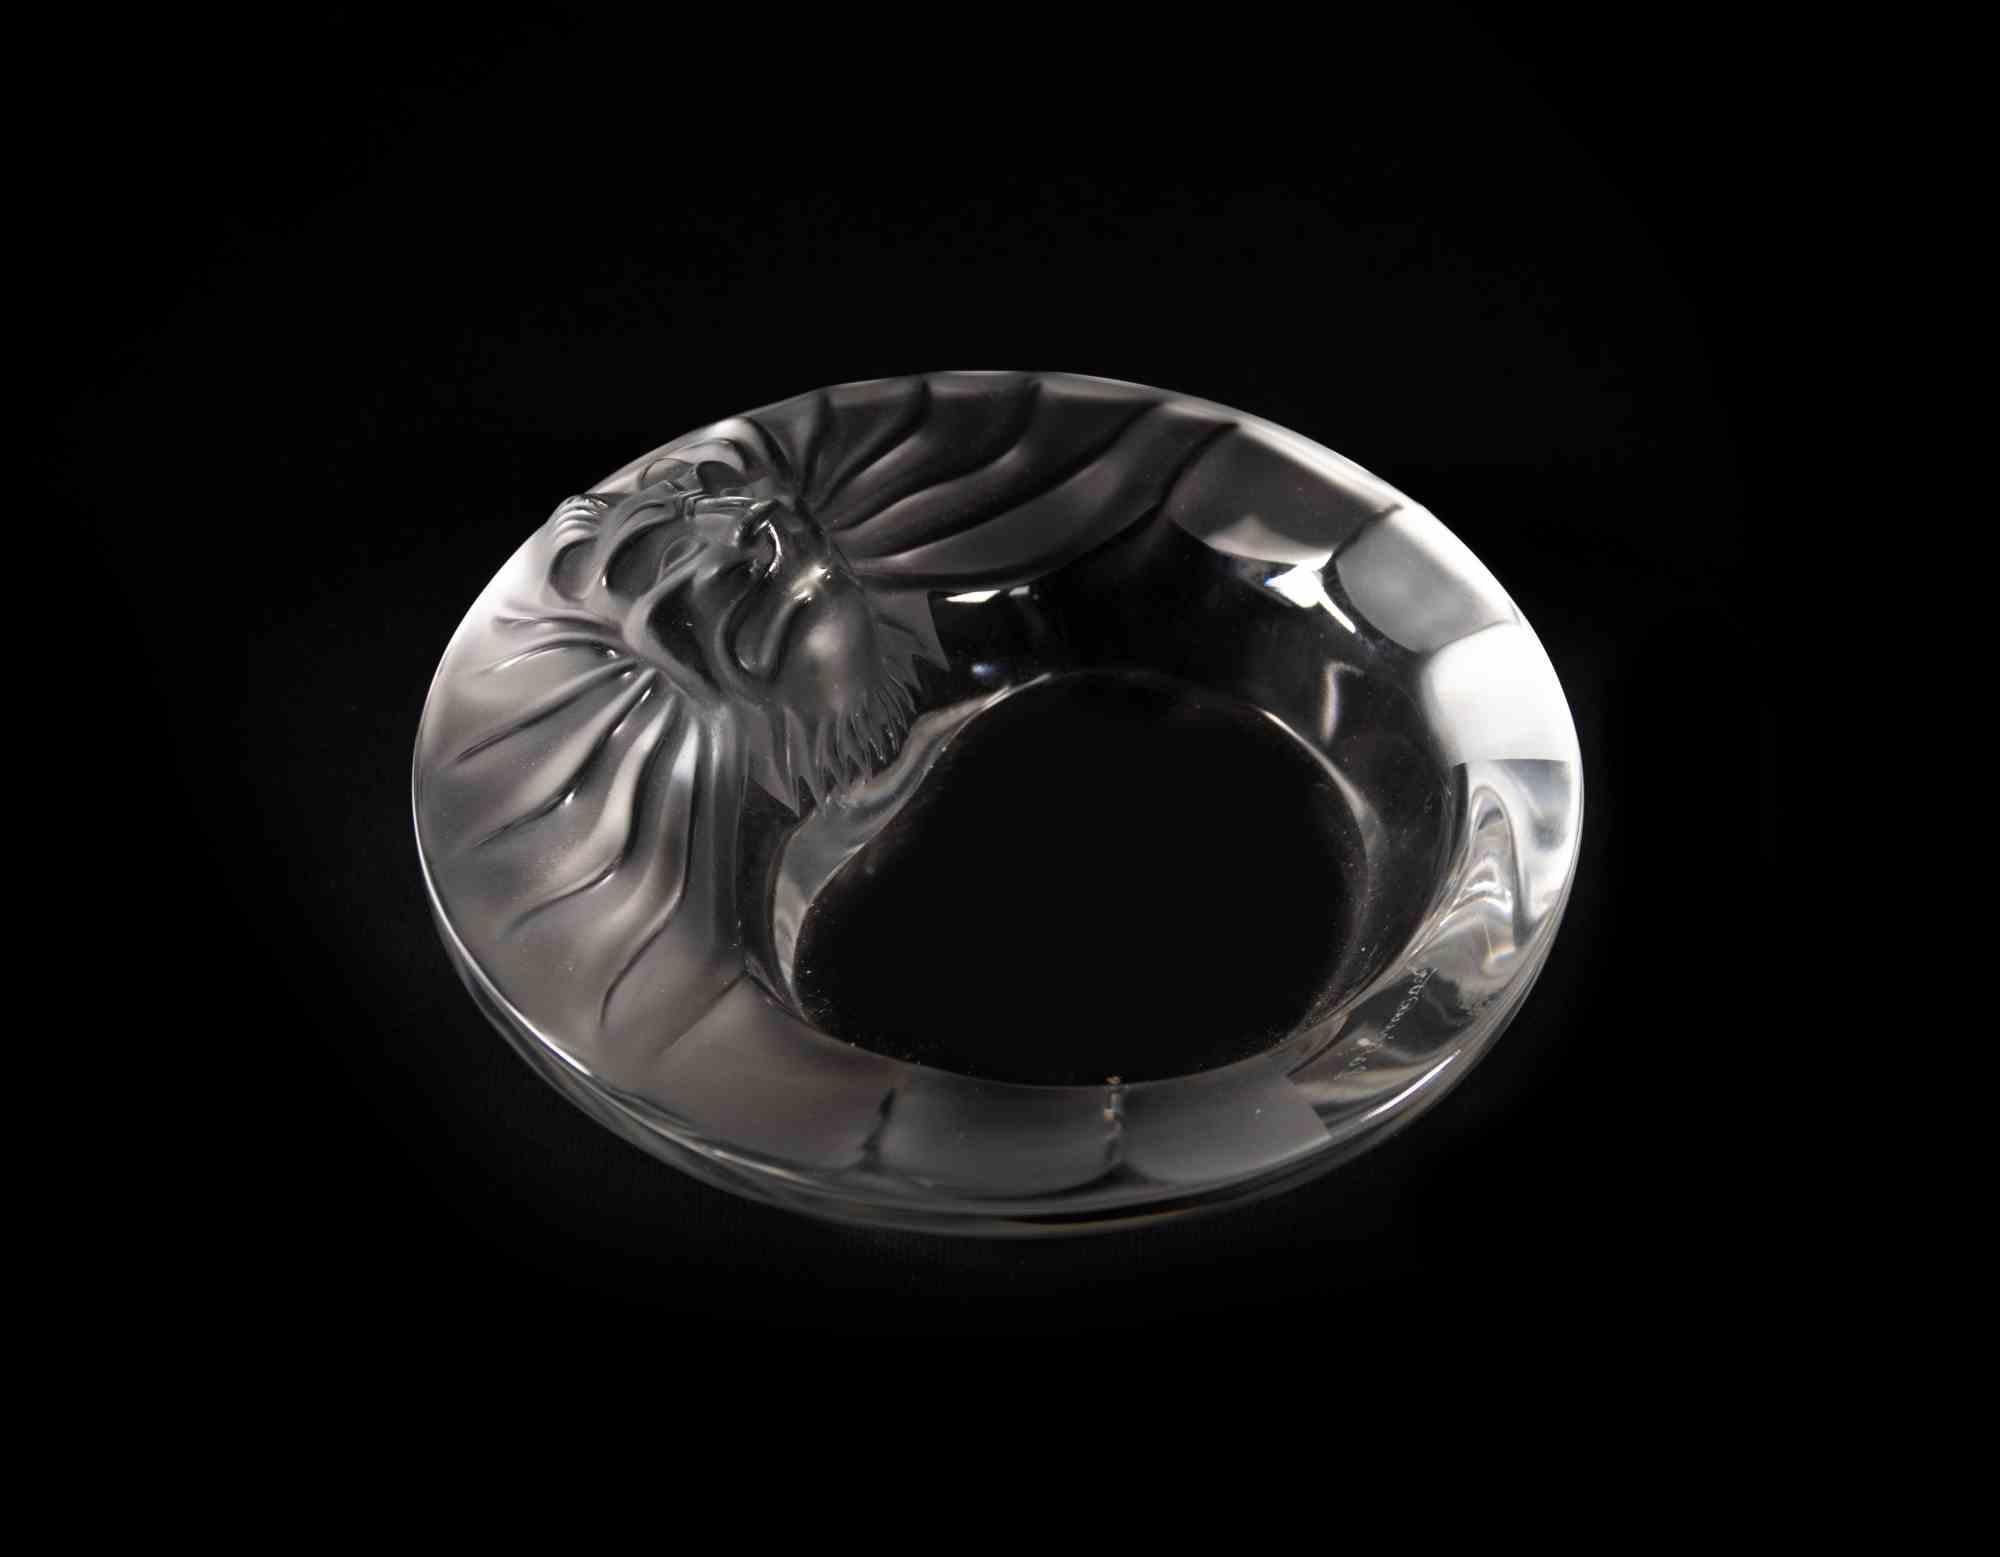 Lalique Head of lion ashtray is an original artwork realized by the famous French manifacture Lalique in the Mid-20th Century.

This super bowl / ashtray is entirely realized in crystal. 

Made in France, Tete de Lion series, side. signed with